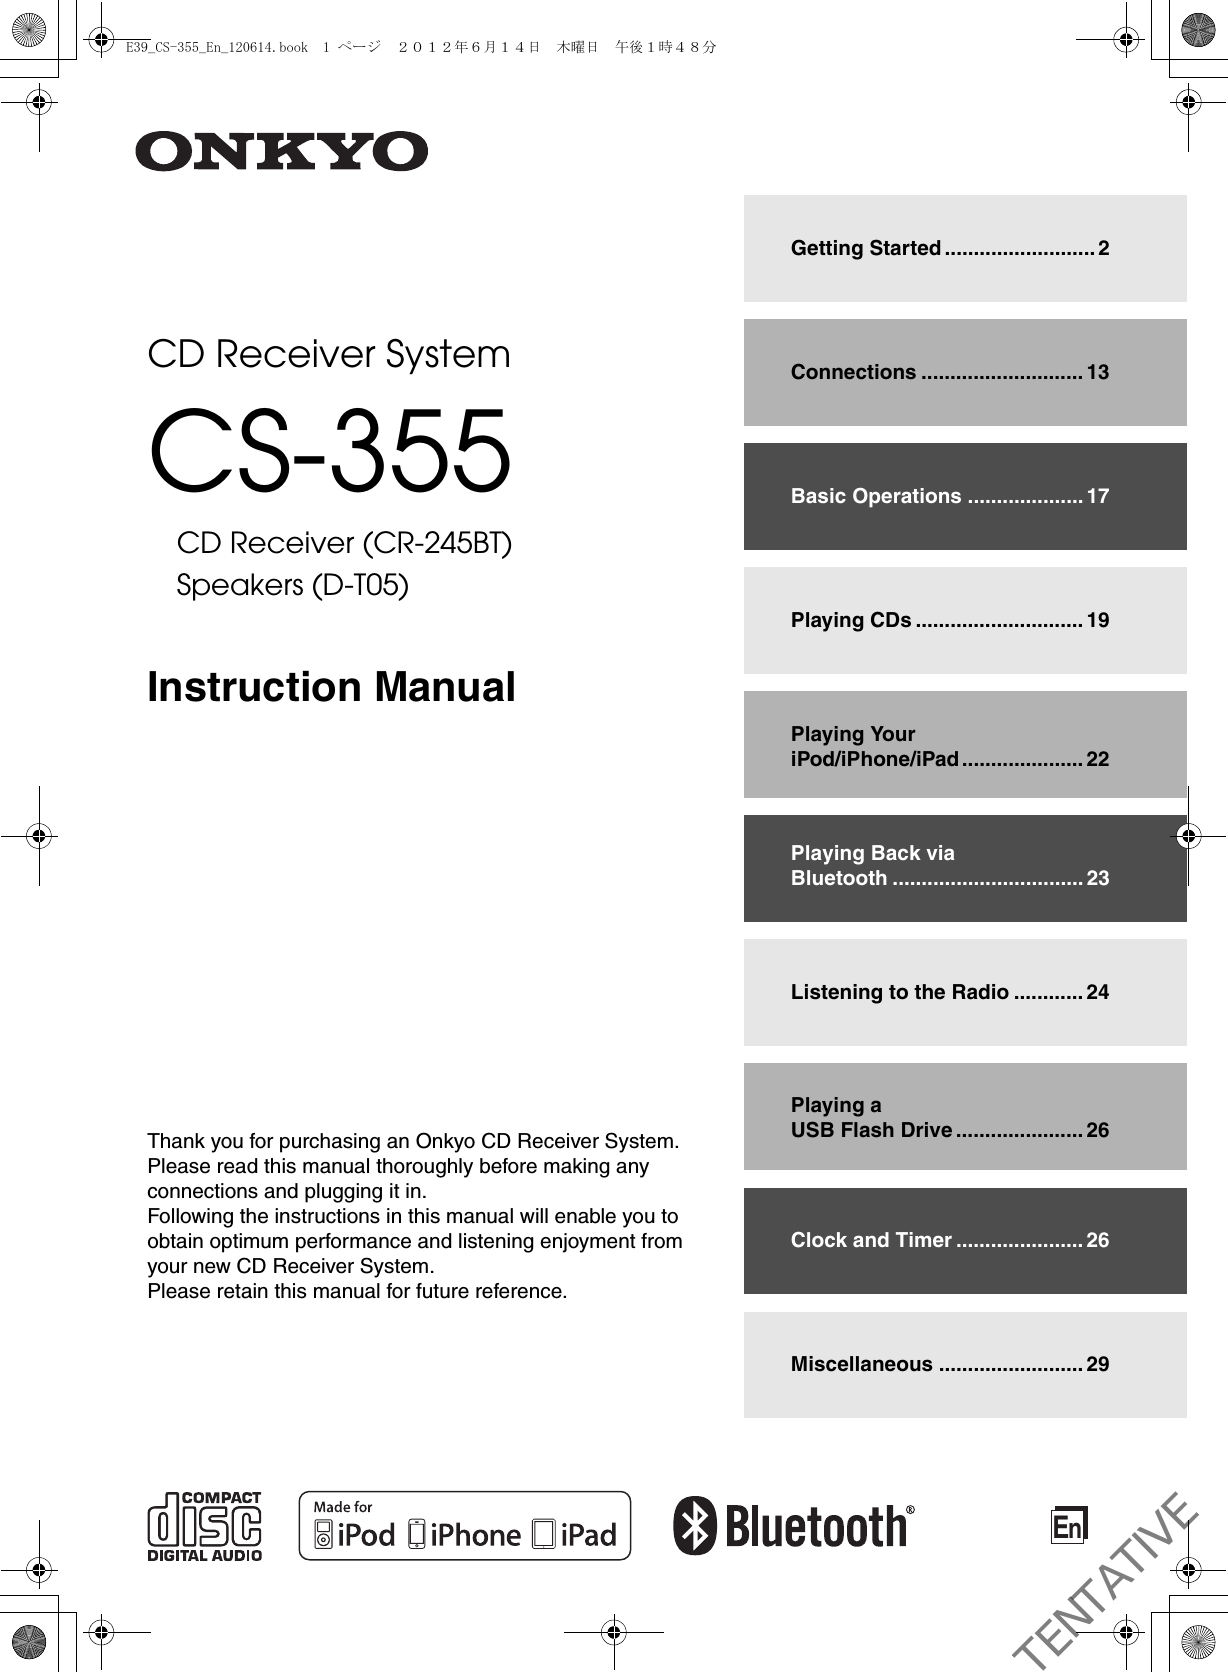 EnCD Receiver SystemCS-355CD Receiver (CR-245BT)Speakers (D-T05)Instruction ManualThank you for purchasing an Onkyo CD Receiver System.Please read this manual thoroughly before making any connections and plugging it in.Following the instructions in this manual will enable you to obtain optimum performance and listening enjoyment from your new CD Receiver System.Please retain this manual for future reference.Getting Started .......................... 2Connections ............................ 13Basic Operations .................... 17Playing CDs ............................. 19Playing Your iPod/iPhone/iPad ..................... 22Playing Back via Bluetooth ................................. 23Listening to the Radio ............ 24Playing a USB Flash Drive ...................... 26Clock and Timer ...................... 26Miscellaneous ......................... 29E39_CS-355_En_120614.book  1 ページ  ２０１２年６月１４日　木曜日　午後１時４８分TENTATIVE